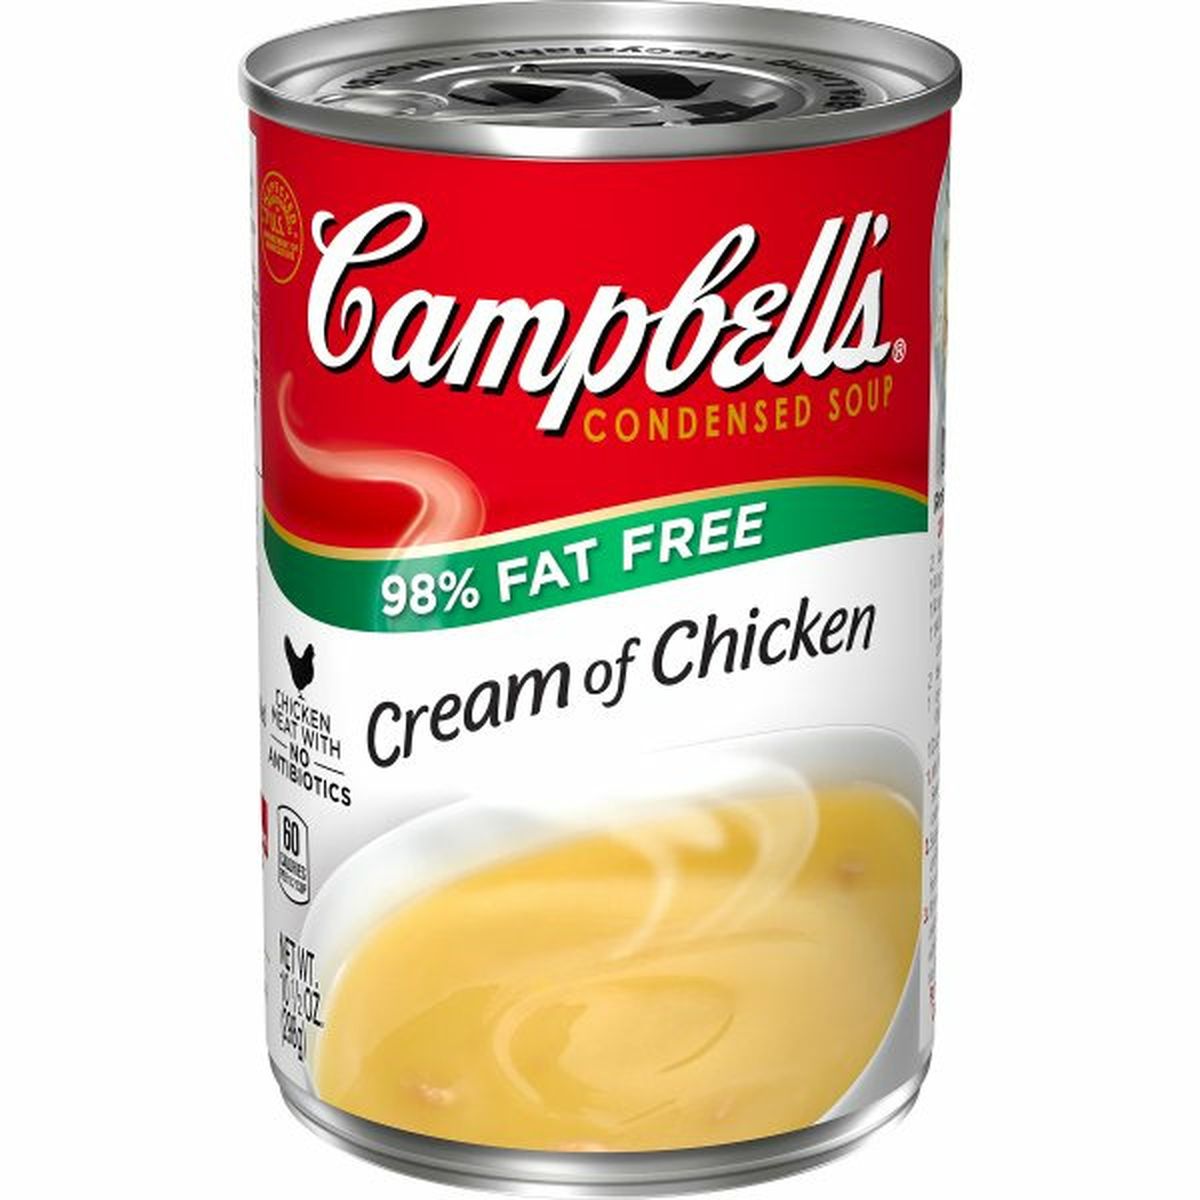 Calories in Campbell'ss Condensed 98% Fat Free Cream of Chicken Soup